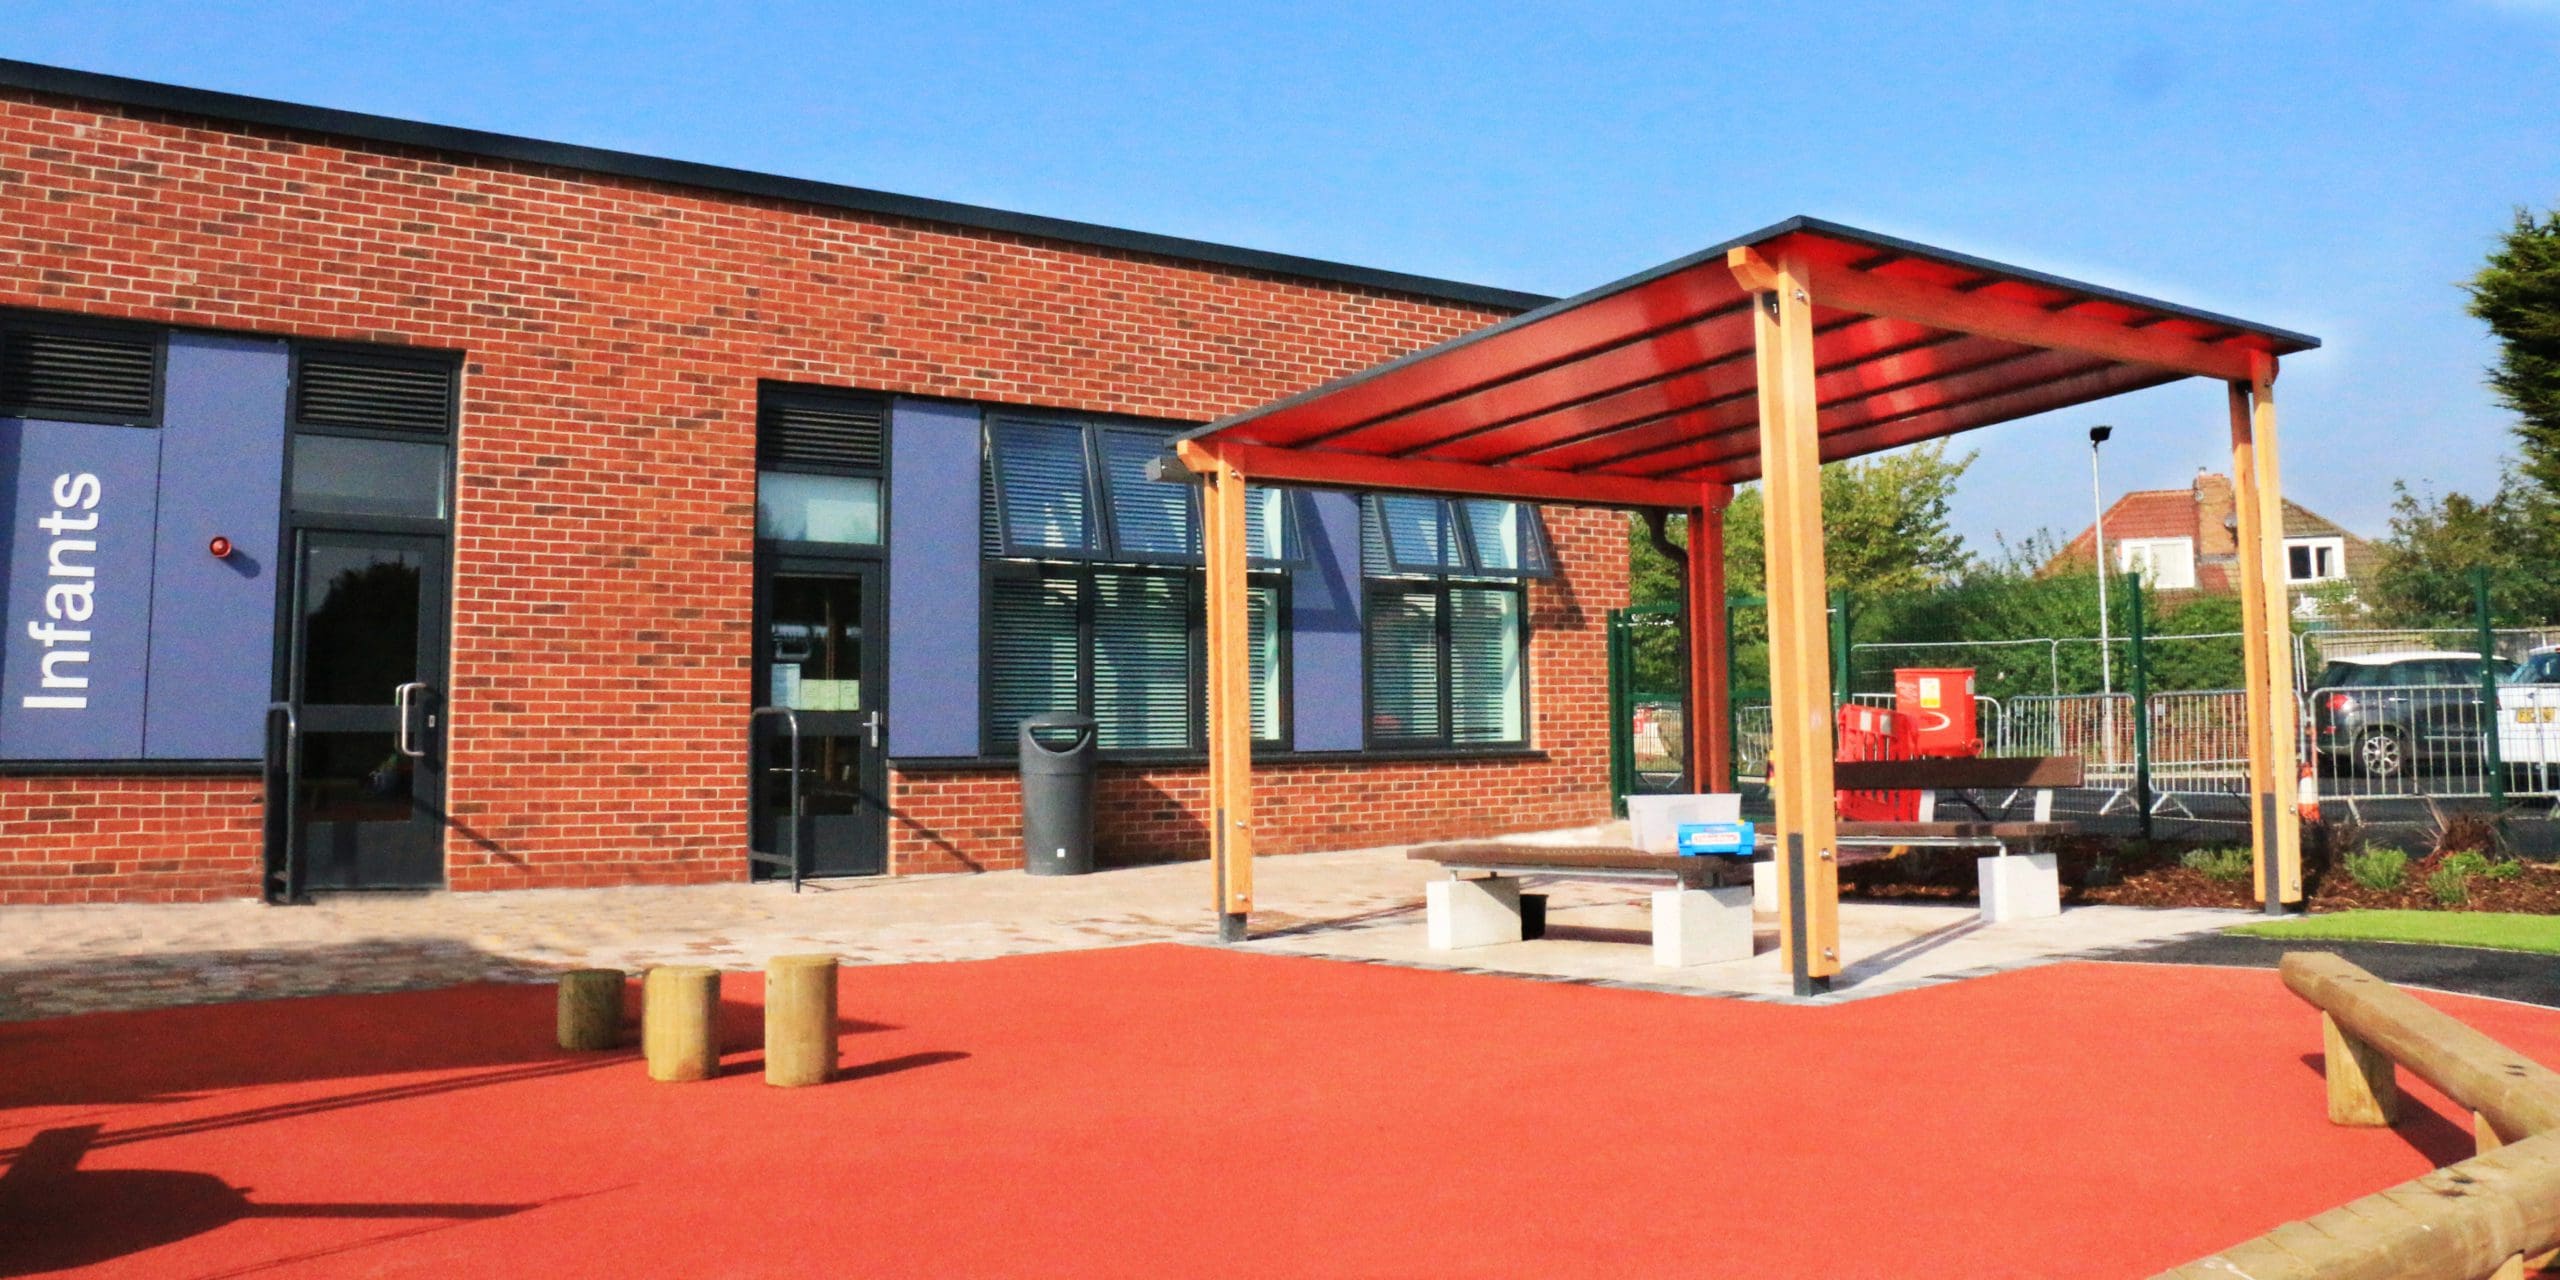 External pergola with red tinted canopy colour infront on red coloured tarmac playground